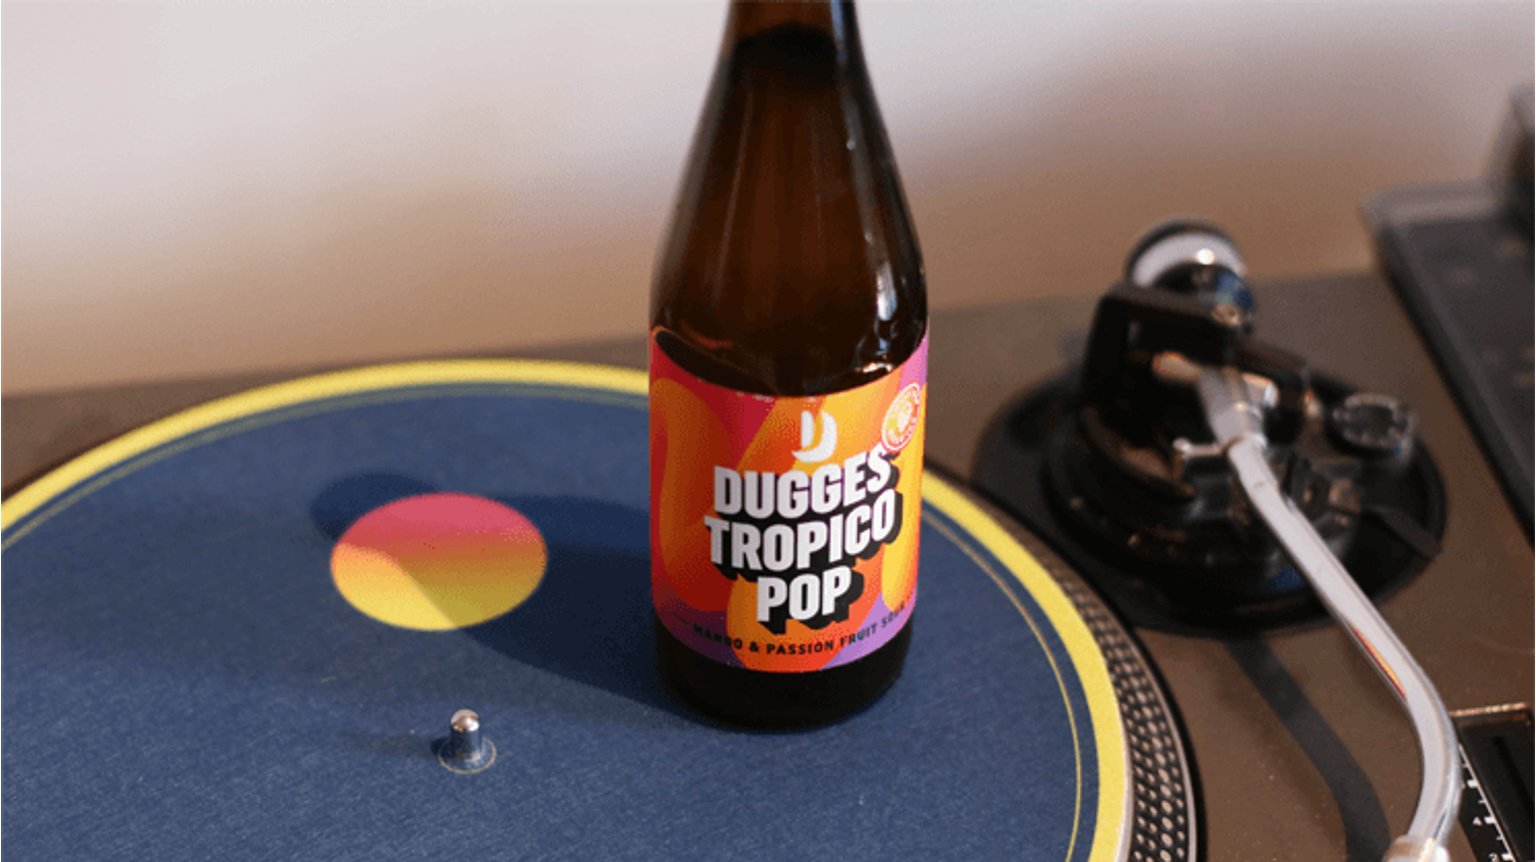 thumbnail for blog article named: Beery Christmas: Dugges – Tropico Pop